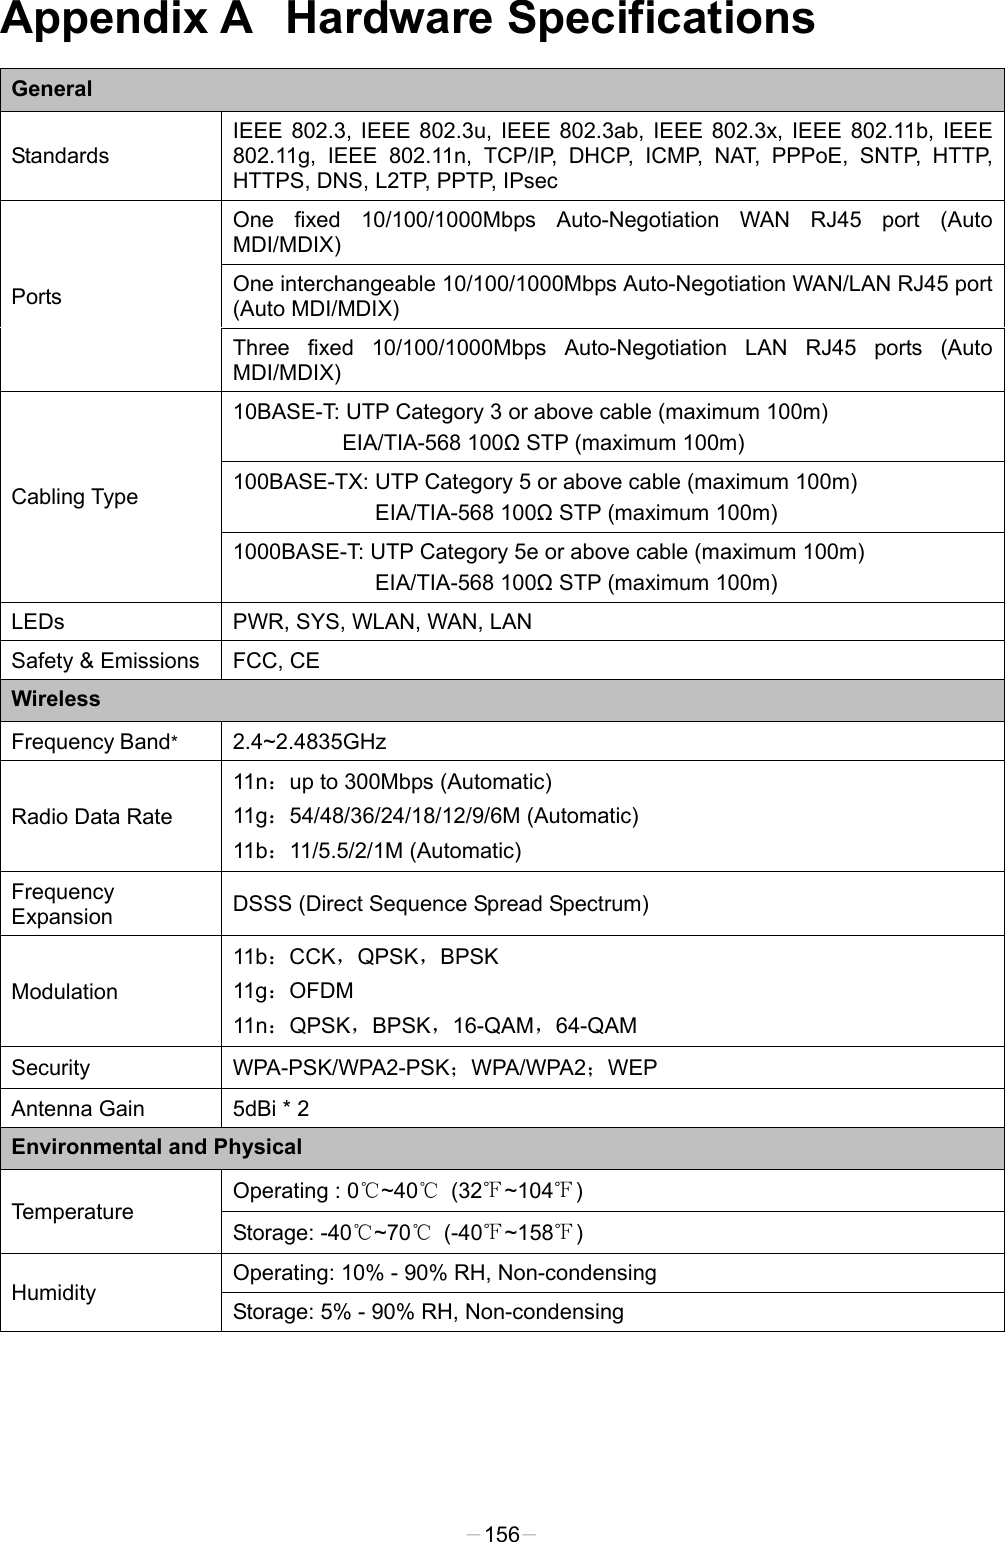  Appendix A   Hardware Specifications General Standards IEEE 802.3, IEEE 802.3u, IEEE 802.3ab, IEEE 802.3x, IEEE 802.11b, IEEE 802.11g,  IEEE 802.11n, TCP/IP, DHCP, ICMP, NAT, PPPoE, SNTP, HTTP, HTTPS, DNS, L2TP, PPTP, IPsec   Ports One fixed 10/100/1000Mbps Auto-Negotiation WAN RJ45 port (Auto MDI/MDIX) One interchangeable 10/100/1000Mbps Auto-Negotiation WAN/LAN RJ45 port (Auto MDI/MDIX) Three  fixed  10/100/1000Mbps Auto-Negotiation LAN RJ45 ports (Auto MDI/MDIX) Cabling Type 10BASE-T: UTP Category 3 or above cable (maximum 100m) EIA/TIA-568 100Ω STP (maximum 100m) 100BASE-TX: UTP Category 5 or above cable (maximum 100m) EIA/TIA-568 100Ω STP (maximum 100m) 1000BASE-T: UTP Category 5e or above cable (maximum 100m) EIA/TIA-568 100Ω STP (maximum 100m) LEDs PWR, SYS, WLAN, WAN, LAN Safety &amp; Emissions FCC, CE Wireless Frequency Band*  2.4~2.4835GHz Radio Data Rate 11n：up to 300Mbps (Automatic) 11g：54/48/36/24/18/12/9/6M (Automatic) 11b：11/5.5/2/1M (Automatic) Frequency Expansion DSSS (Direct Sequence Spread Spectrum) Modulation 11b：CCK，QPSK，BPSK   11g：OFDM   11n：QPSK，BPSK，16-QAM，64-QAM Security WPA-PSK/WPA2-PSK；WPA/WPA2；WEP Antenna Gain  5dBi * 2   Environmental and Physical Temperature Operating : 0℃~40℃  (32℉~104℉) Storage: -40℃~70℃  (-40℉~158℉) Humidity Operating: 10% - 90% RH, Non-condensing Storage: 5% - 90% RH, Non-condensing -156- 